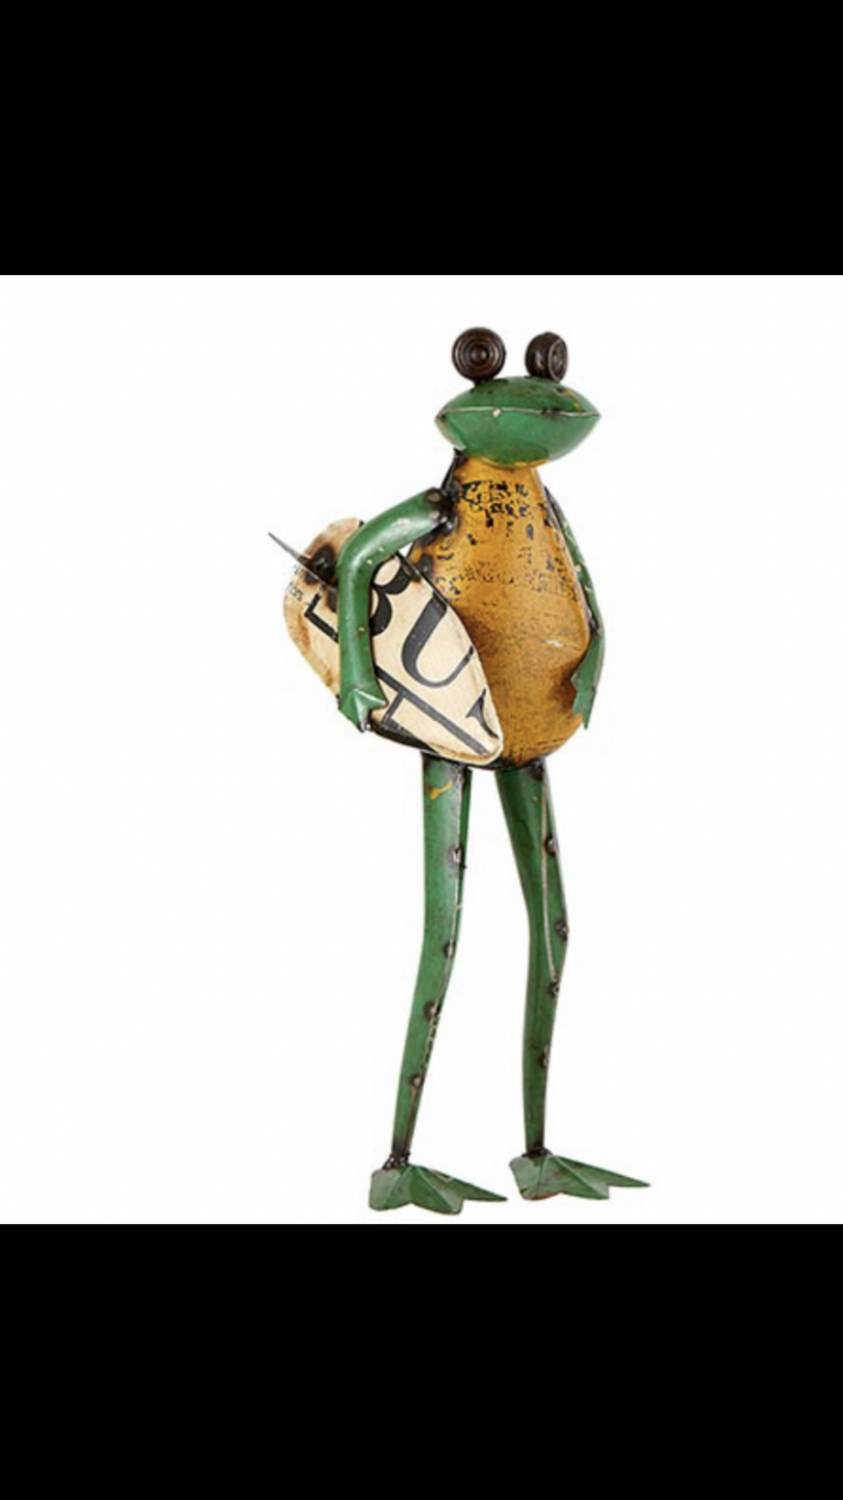 Iron Frog with Surfboard